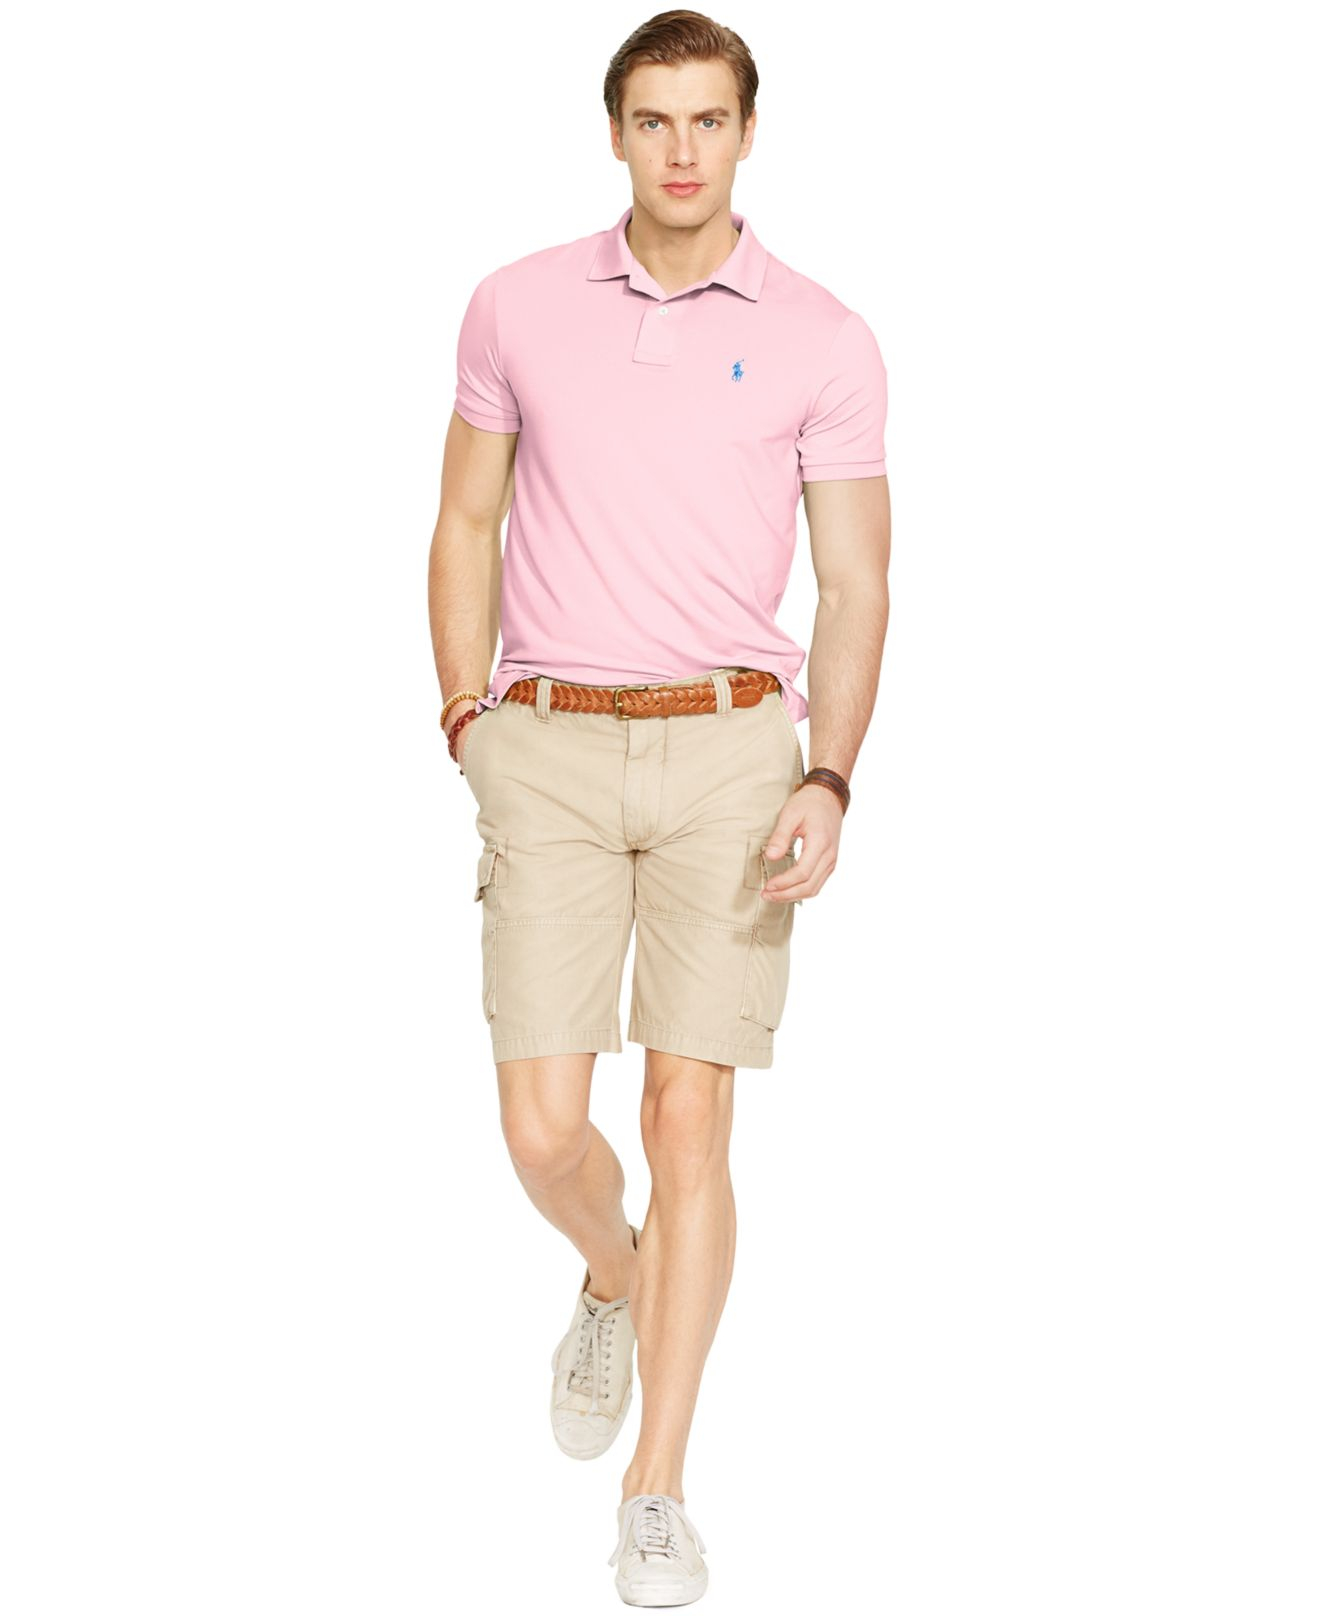 Polo Ralph Lauren Performance Jersey Polo Shirt in Pink for Men - Lyst